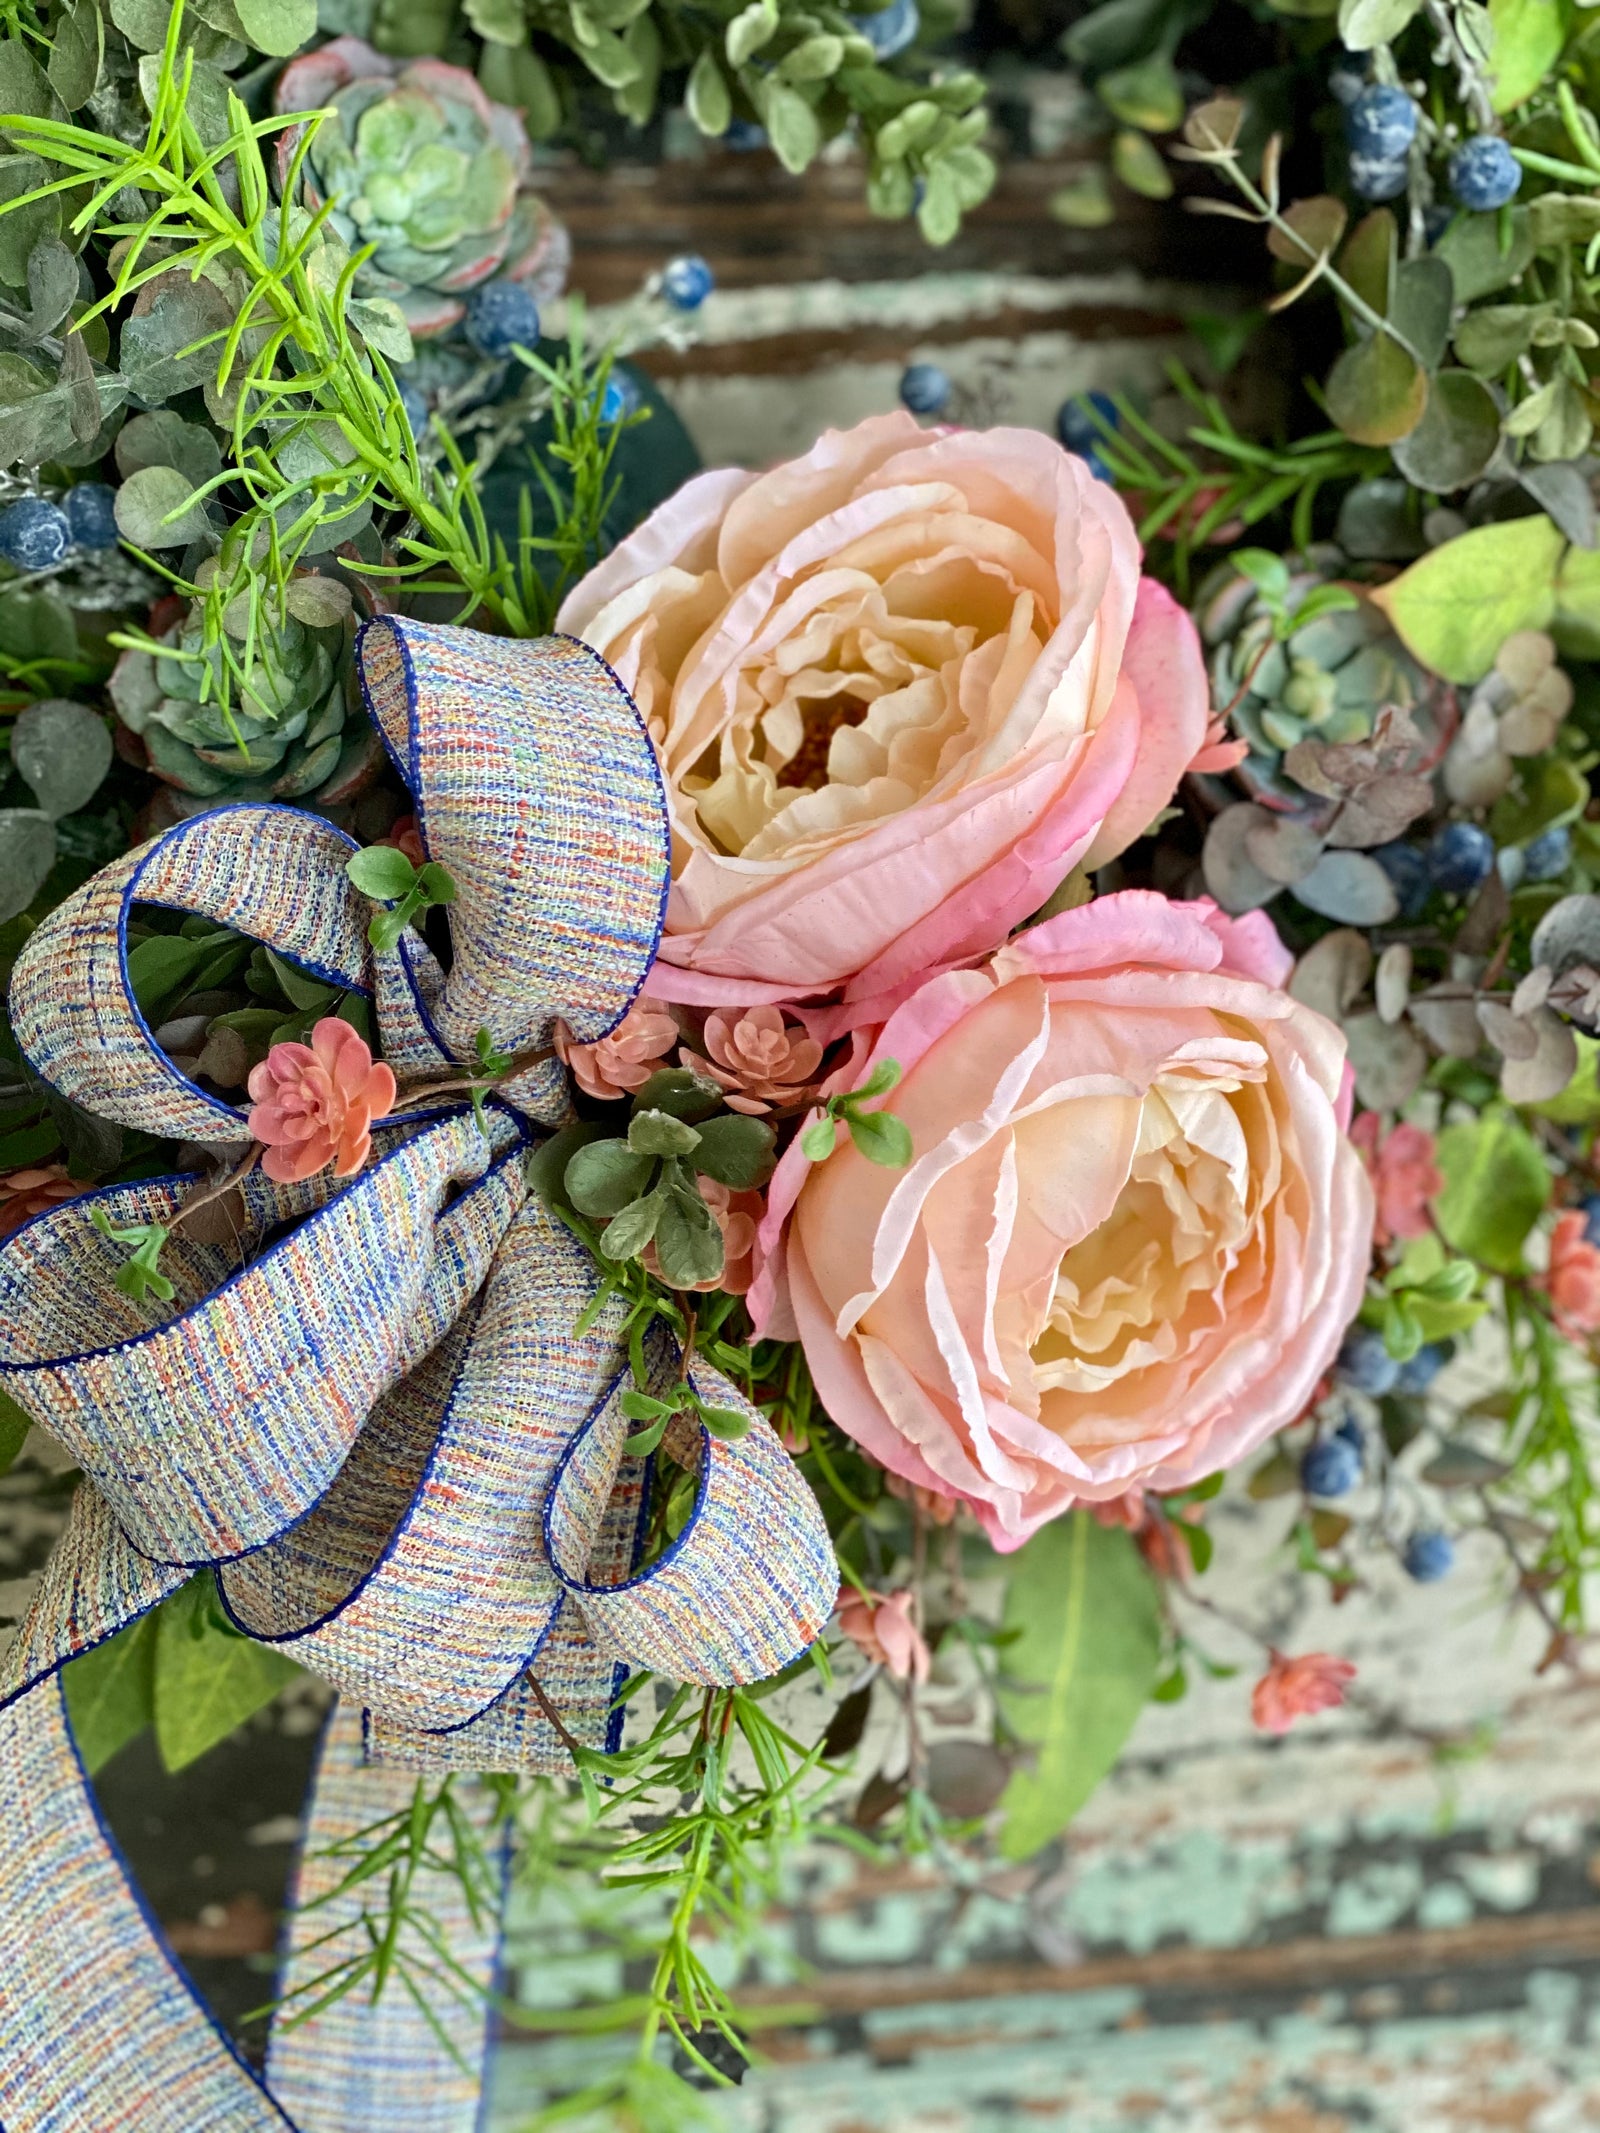 Everyday Spring Wreath Pink Blossoms & Berries with Houndstooth Ribbon –  Brownbottle Burlap